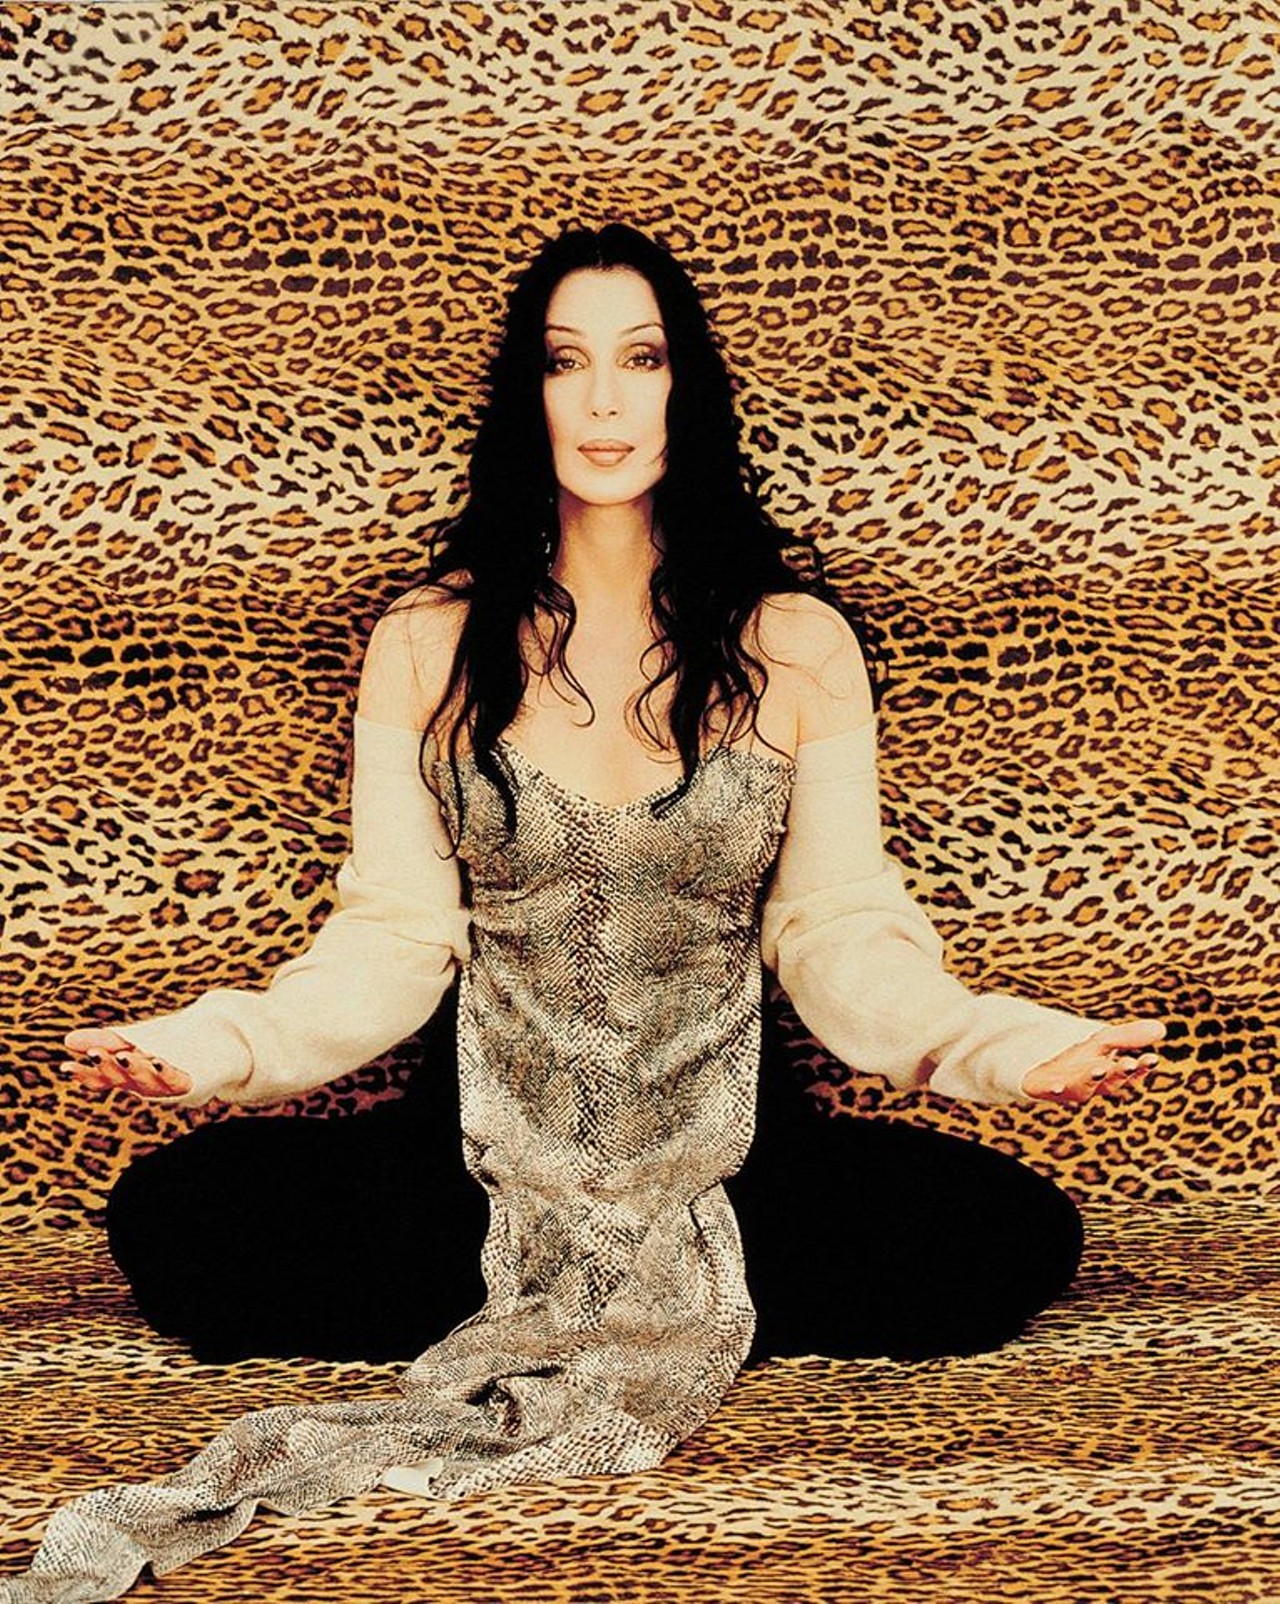 '90s leapord namaste Cher. Do you believe in enlightenment?
Photo via Facebook / Cher